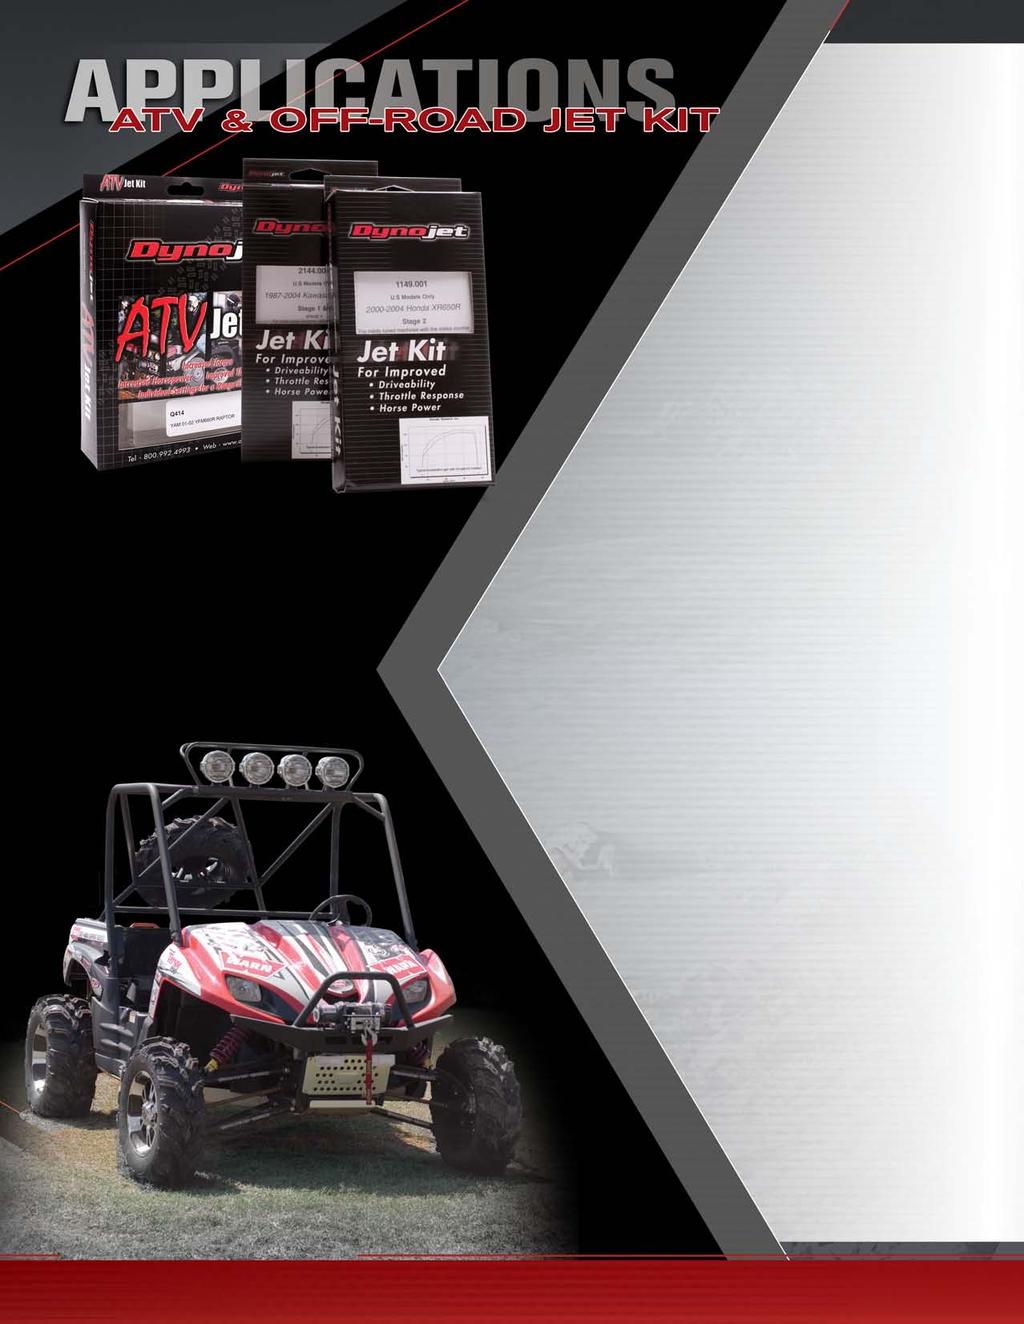 Get the most out of your ATV or Off Road Motorcycle Maximize performance Increased horsepower Easy installation CC Year Model Stage Part # Price Arctic Cat 250 99-00 AC250 1 Q601 L 250 01-05 AC250